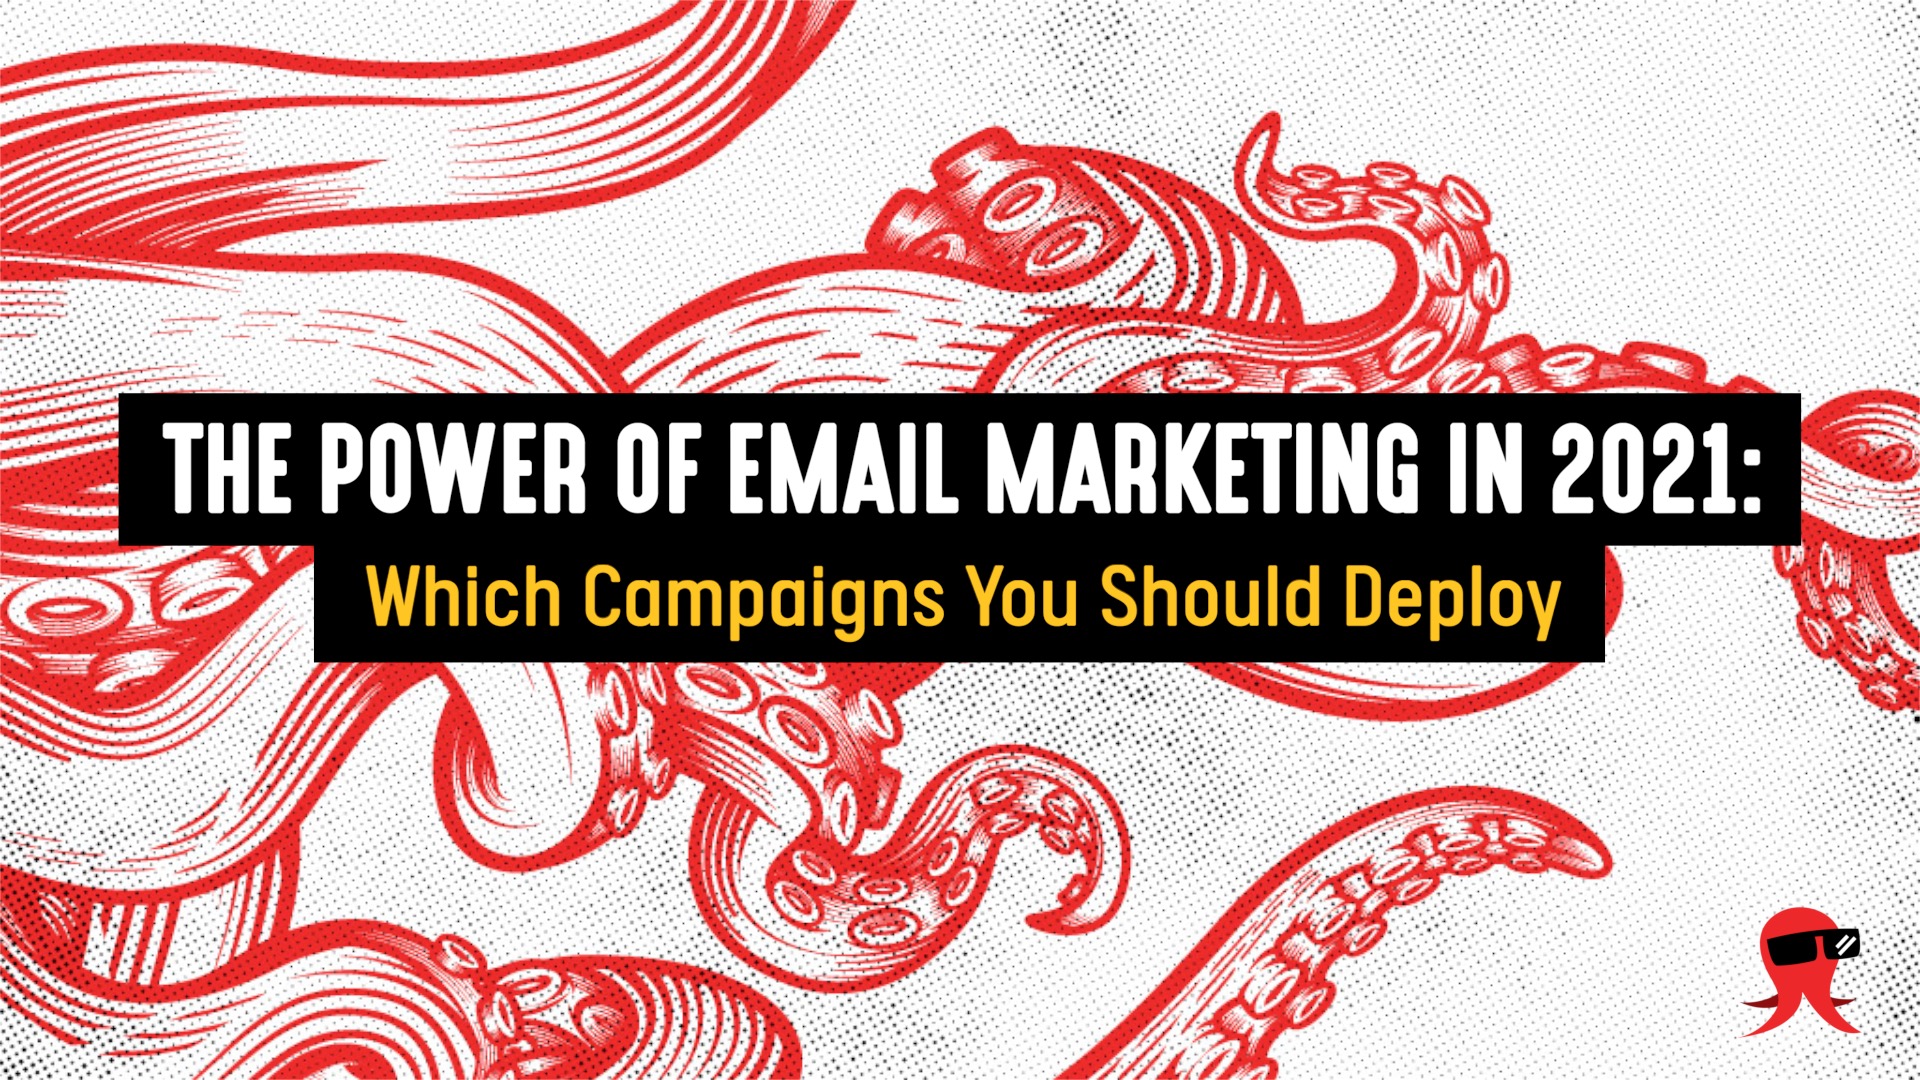 The Power of Email Marketing in 2021, and Which Campaigns You Should Deploy